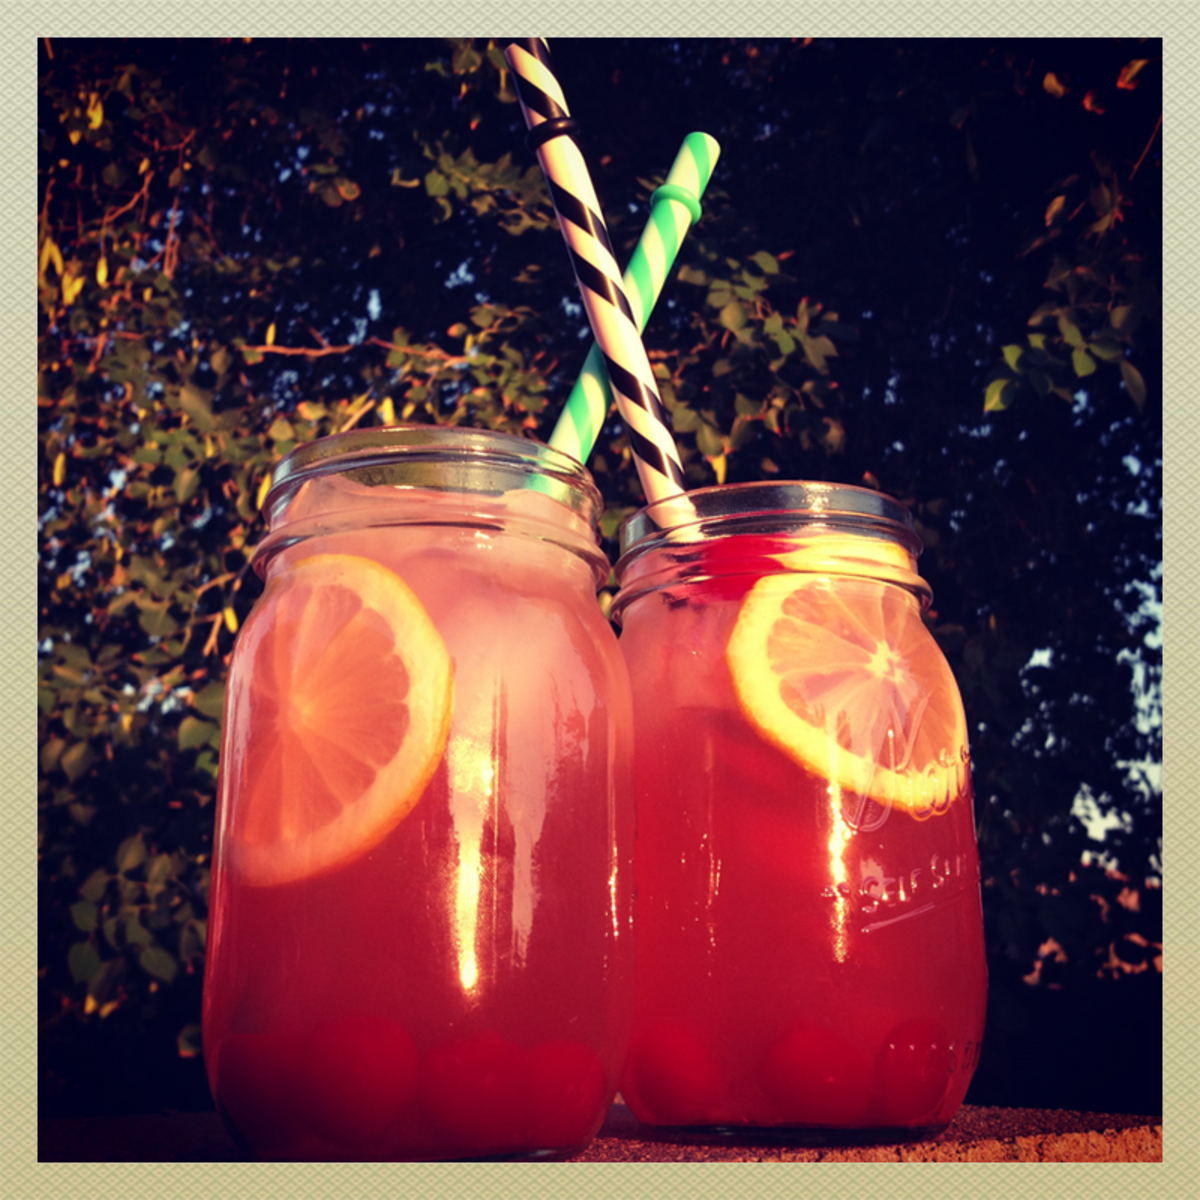 Shirley Temple lemonade for two